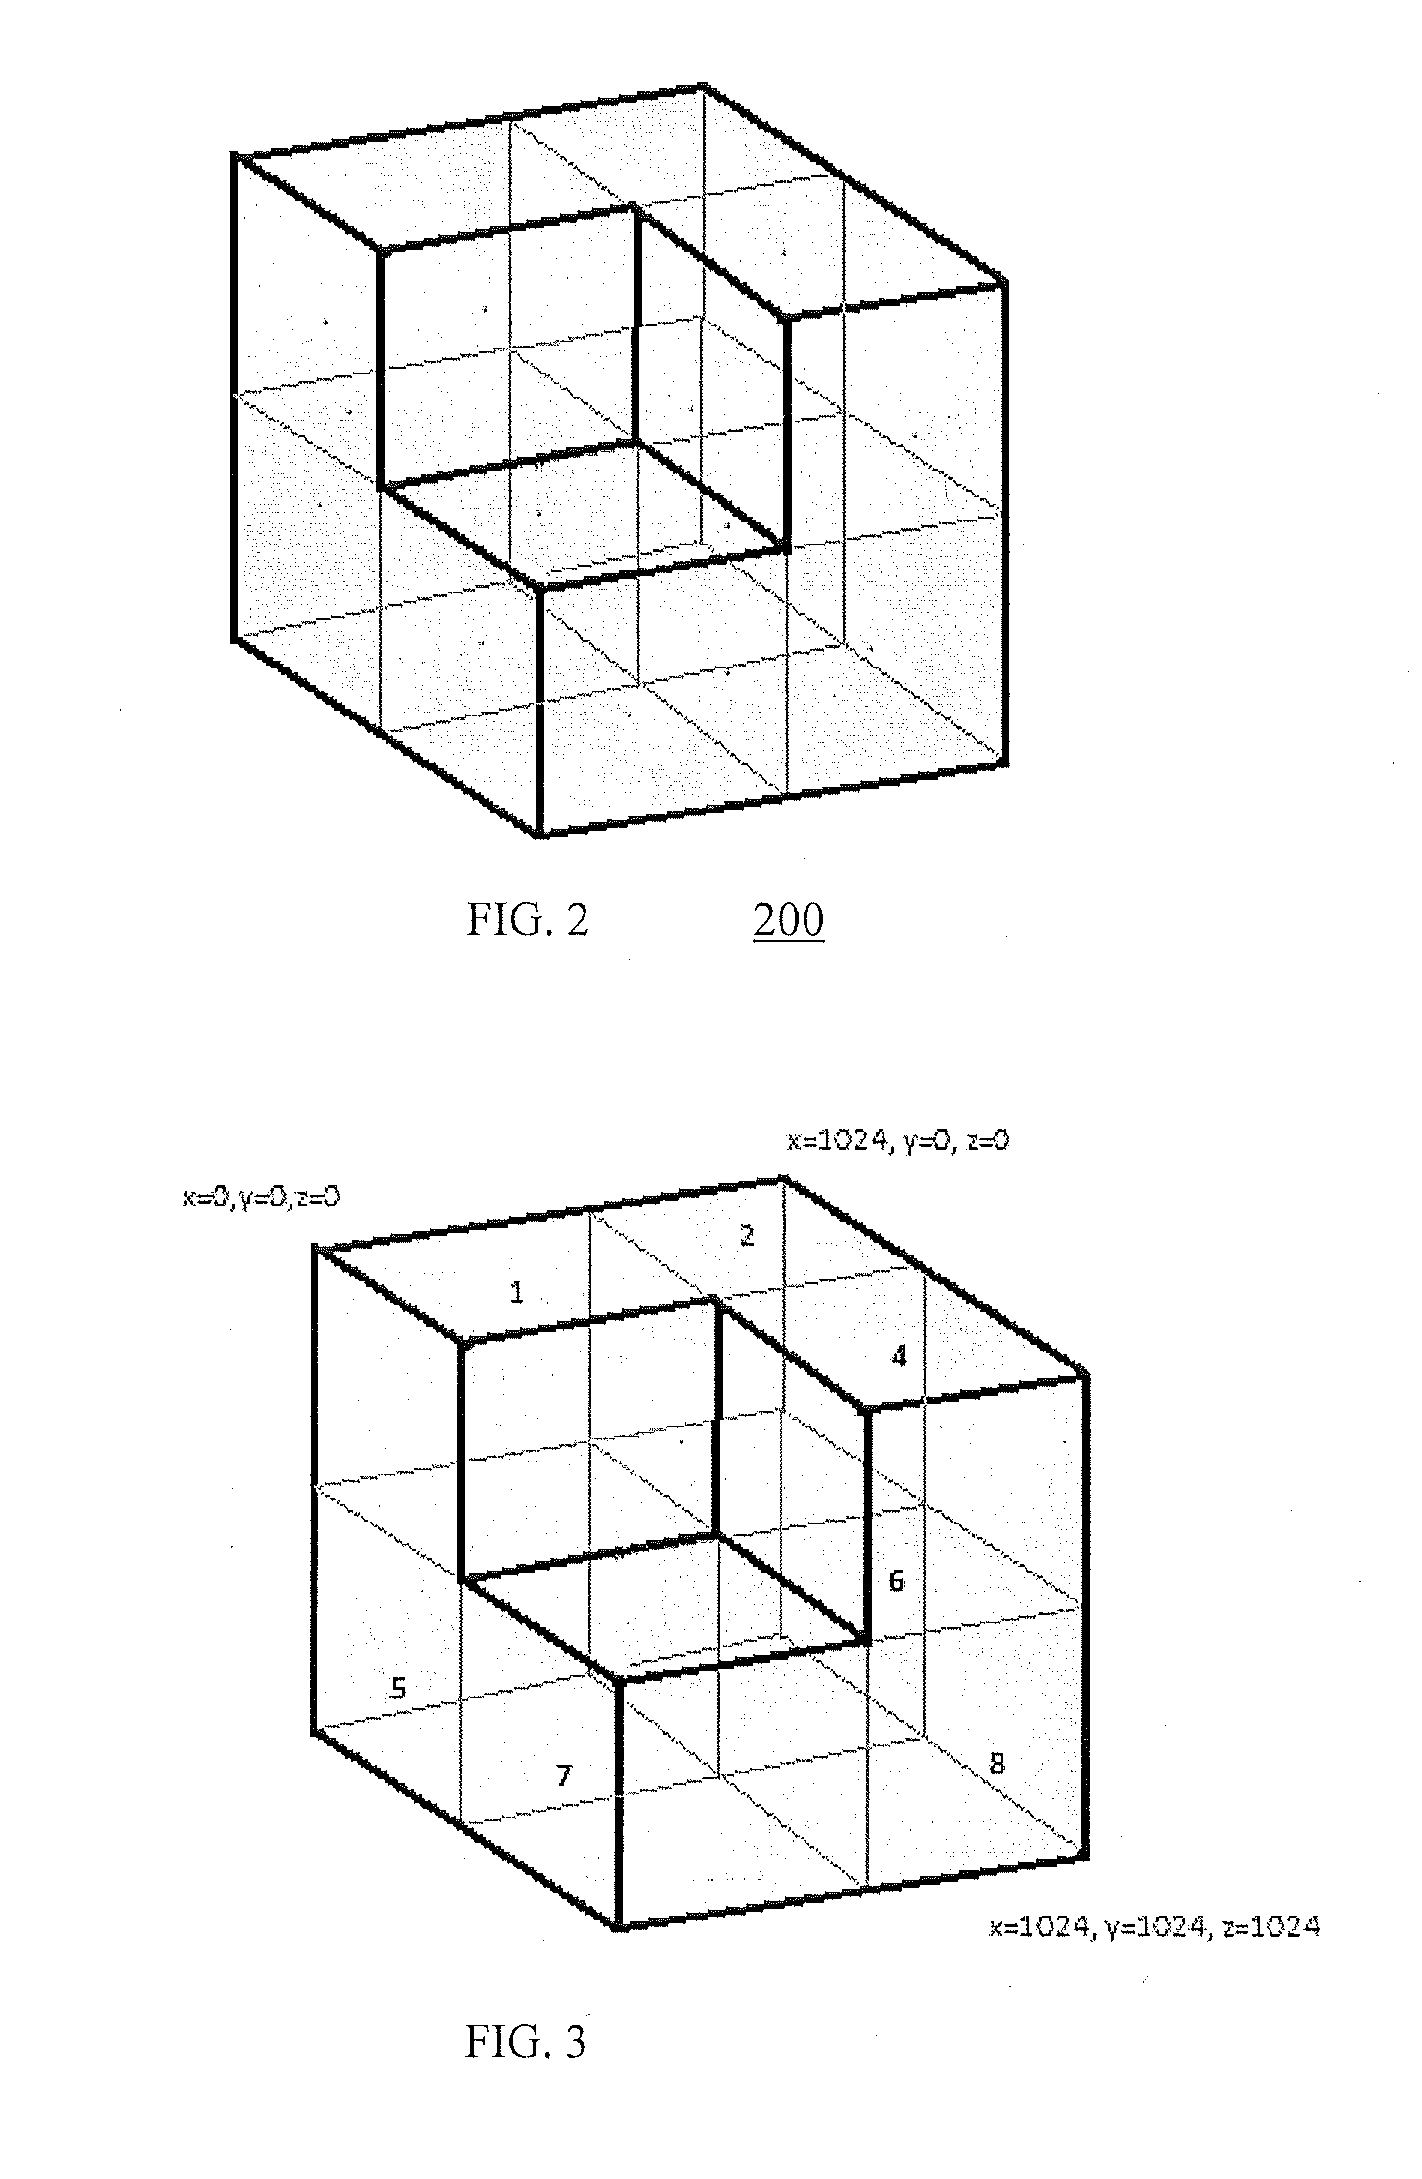 System and method for fast optimization of point cloud data